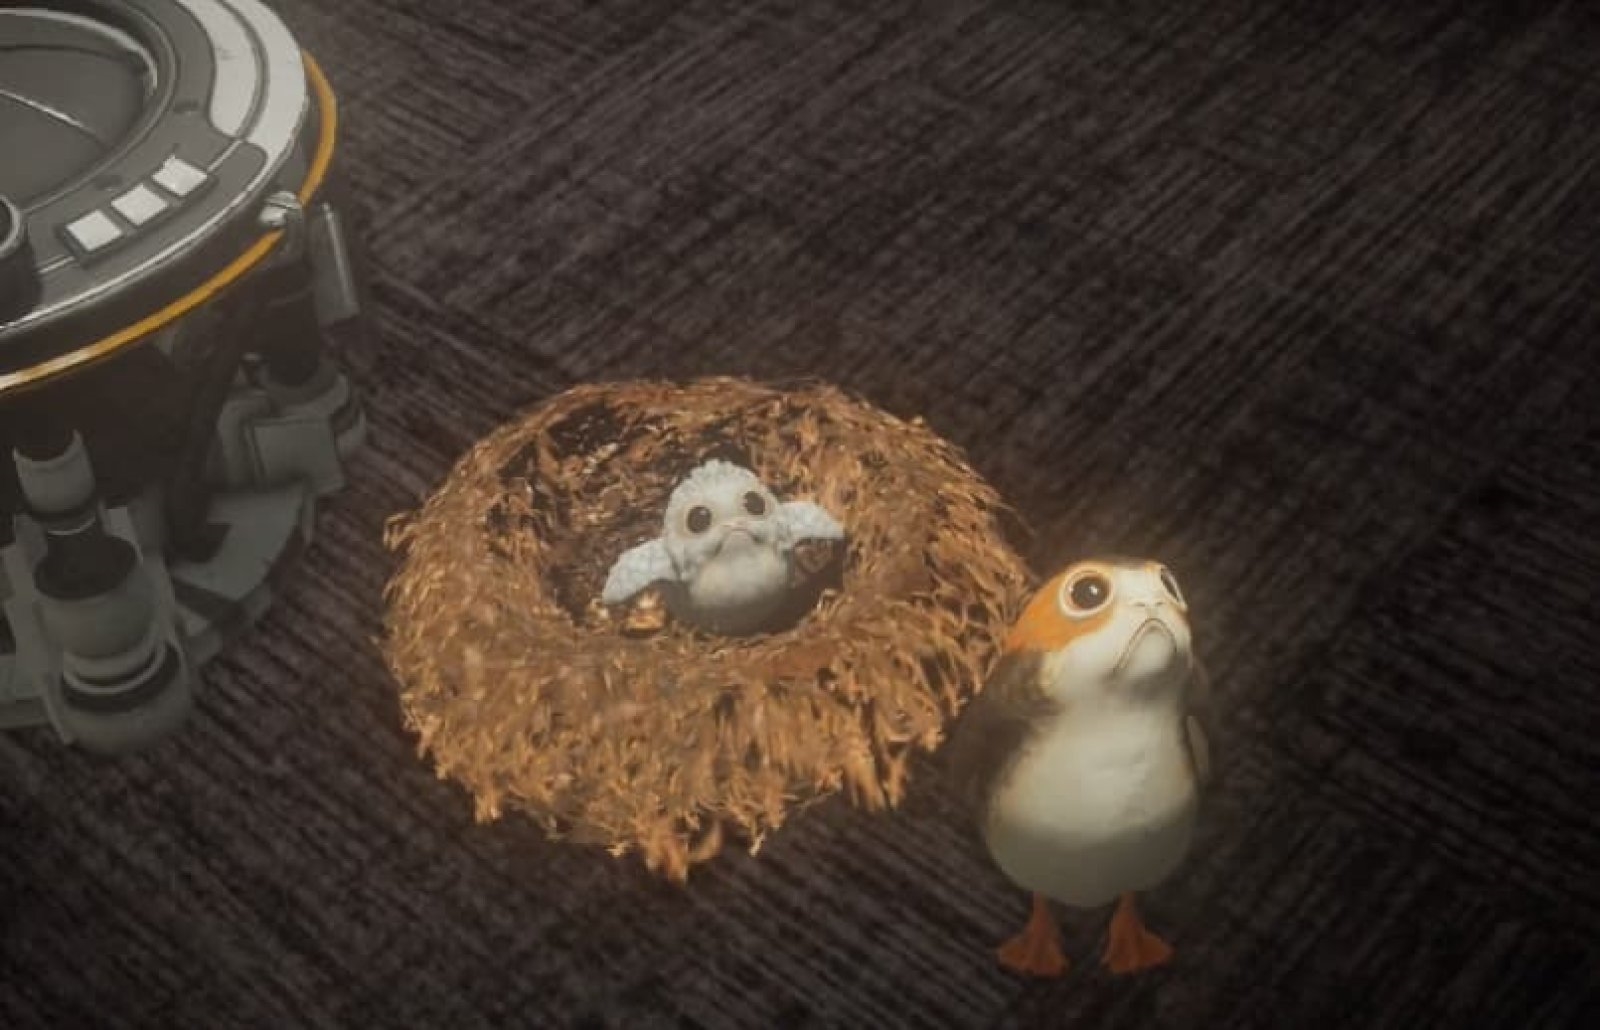 Star Wars' porgs can be your virtual pets on Magic Leap One | DeviceDaily.com